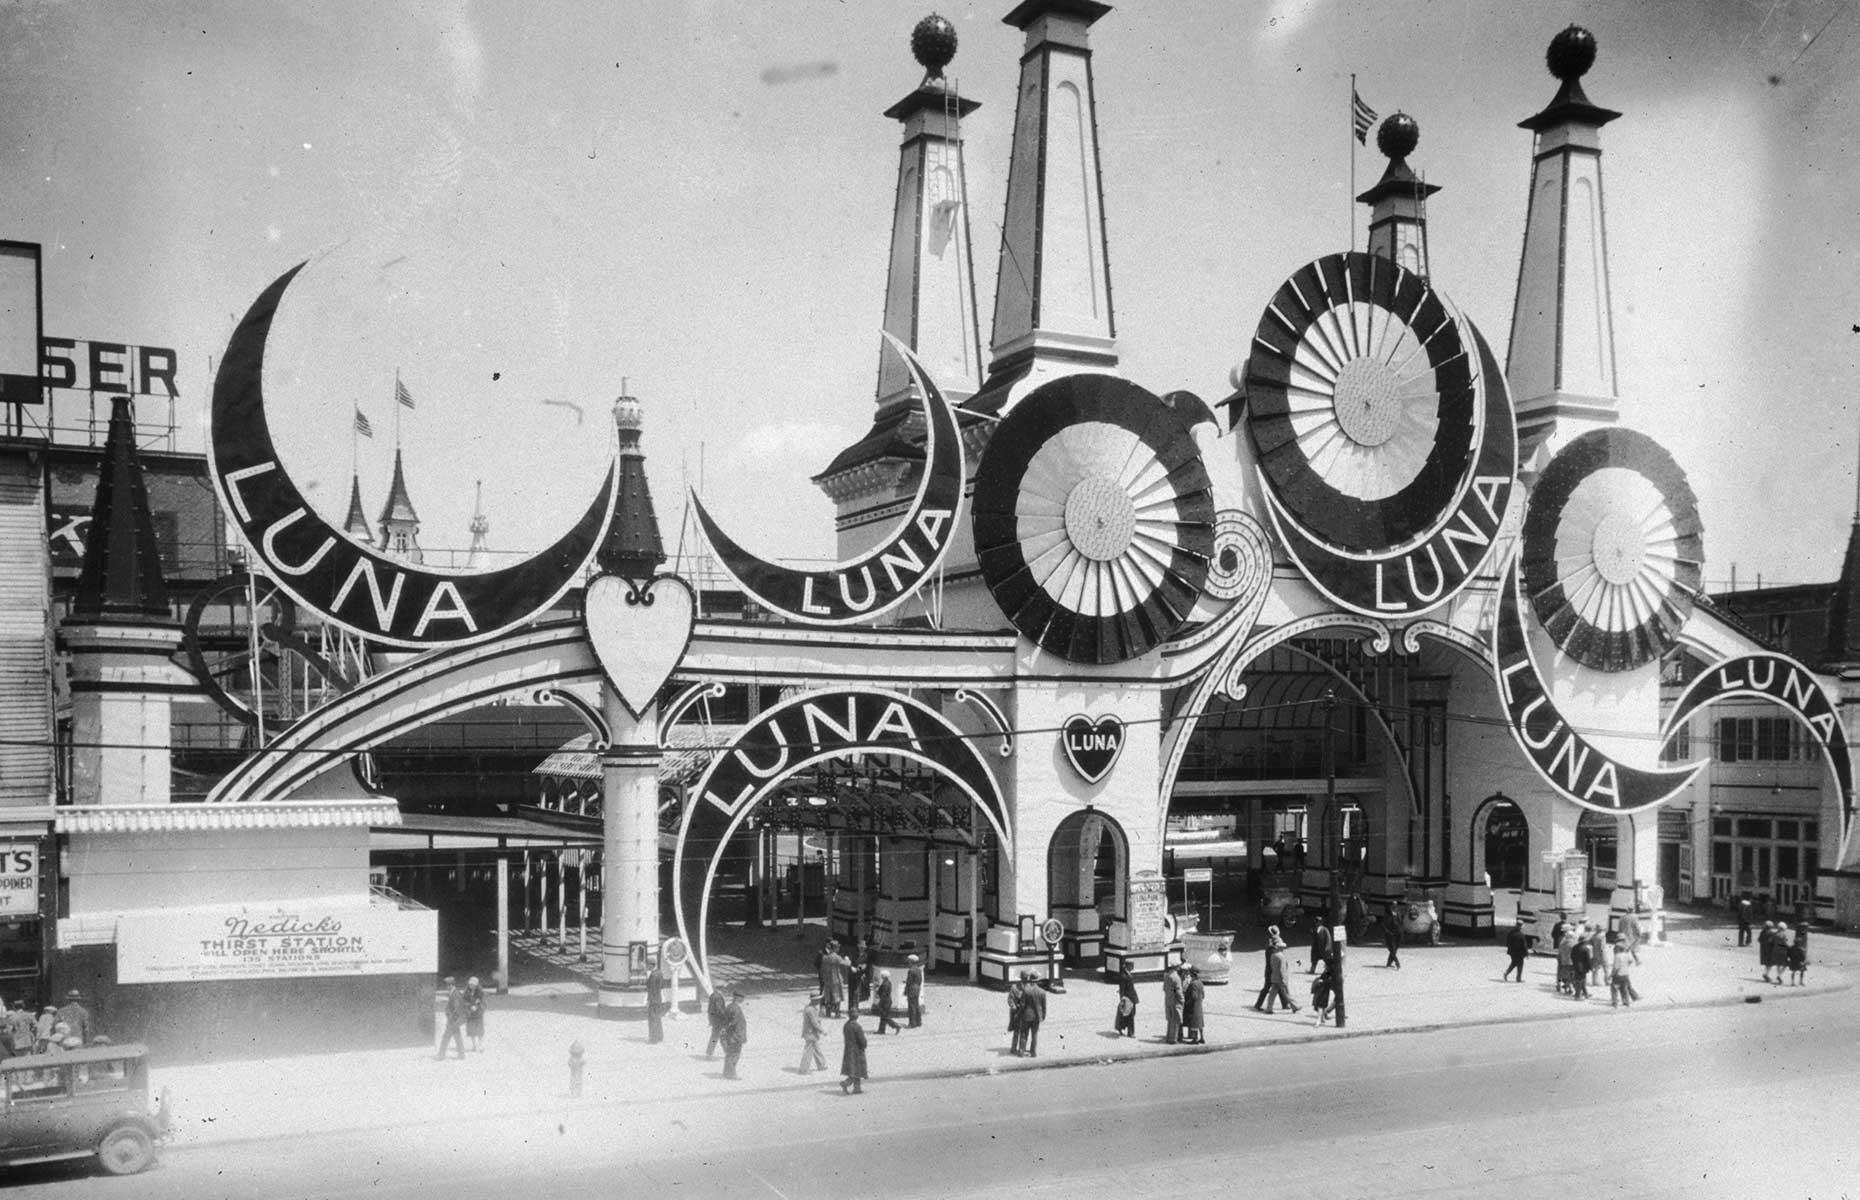 Slide 2 of 35: The fabulously kitsch rides and amusements of Brooklyn's Coney Island have certainly stood the test of time, with the very first roller coaster, the Switchback Railway, making its debut in 1884. The "island's" Luna Park, meanwhile, opened in 1903, entertaining holidaymakers for over four decades before it was ravaged by fire in 1944. Here visitors gather around the entryway, with its flags, turrets, and giant half-moons, in the early 1900s.